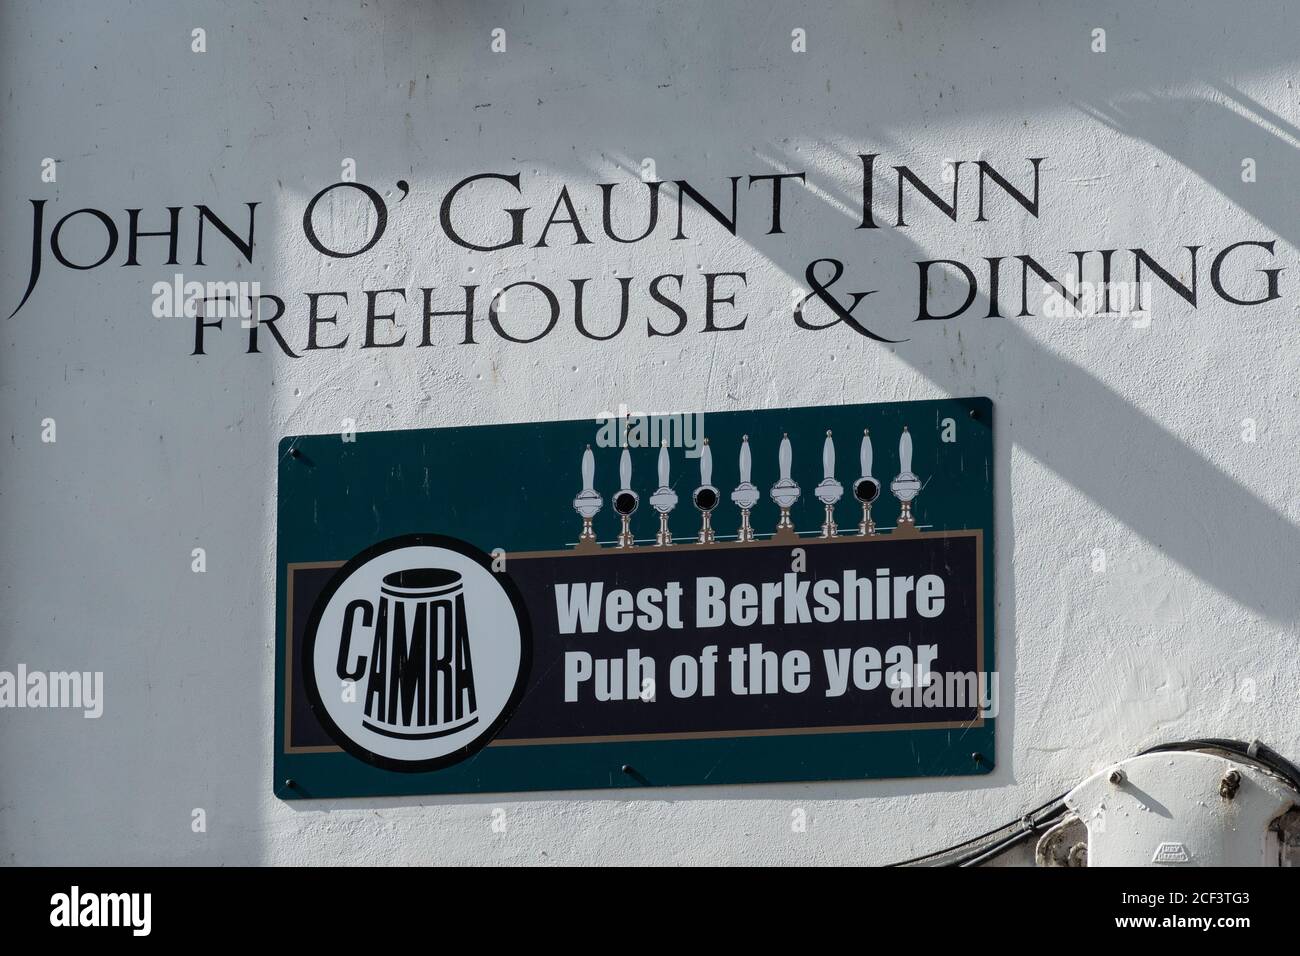 John O'Gaunt Inn or pub in Hungerford, Berkshire, UK. Plaque with CAMRA West Berkshire Pub of the Year Stock Photo